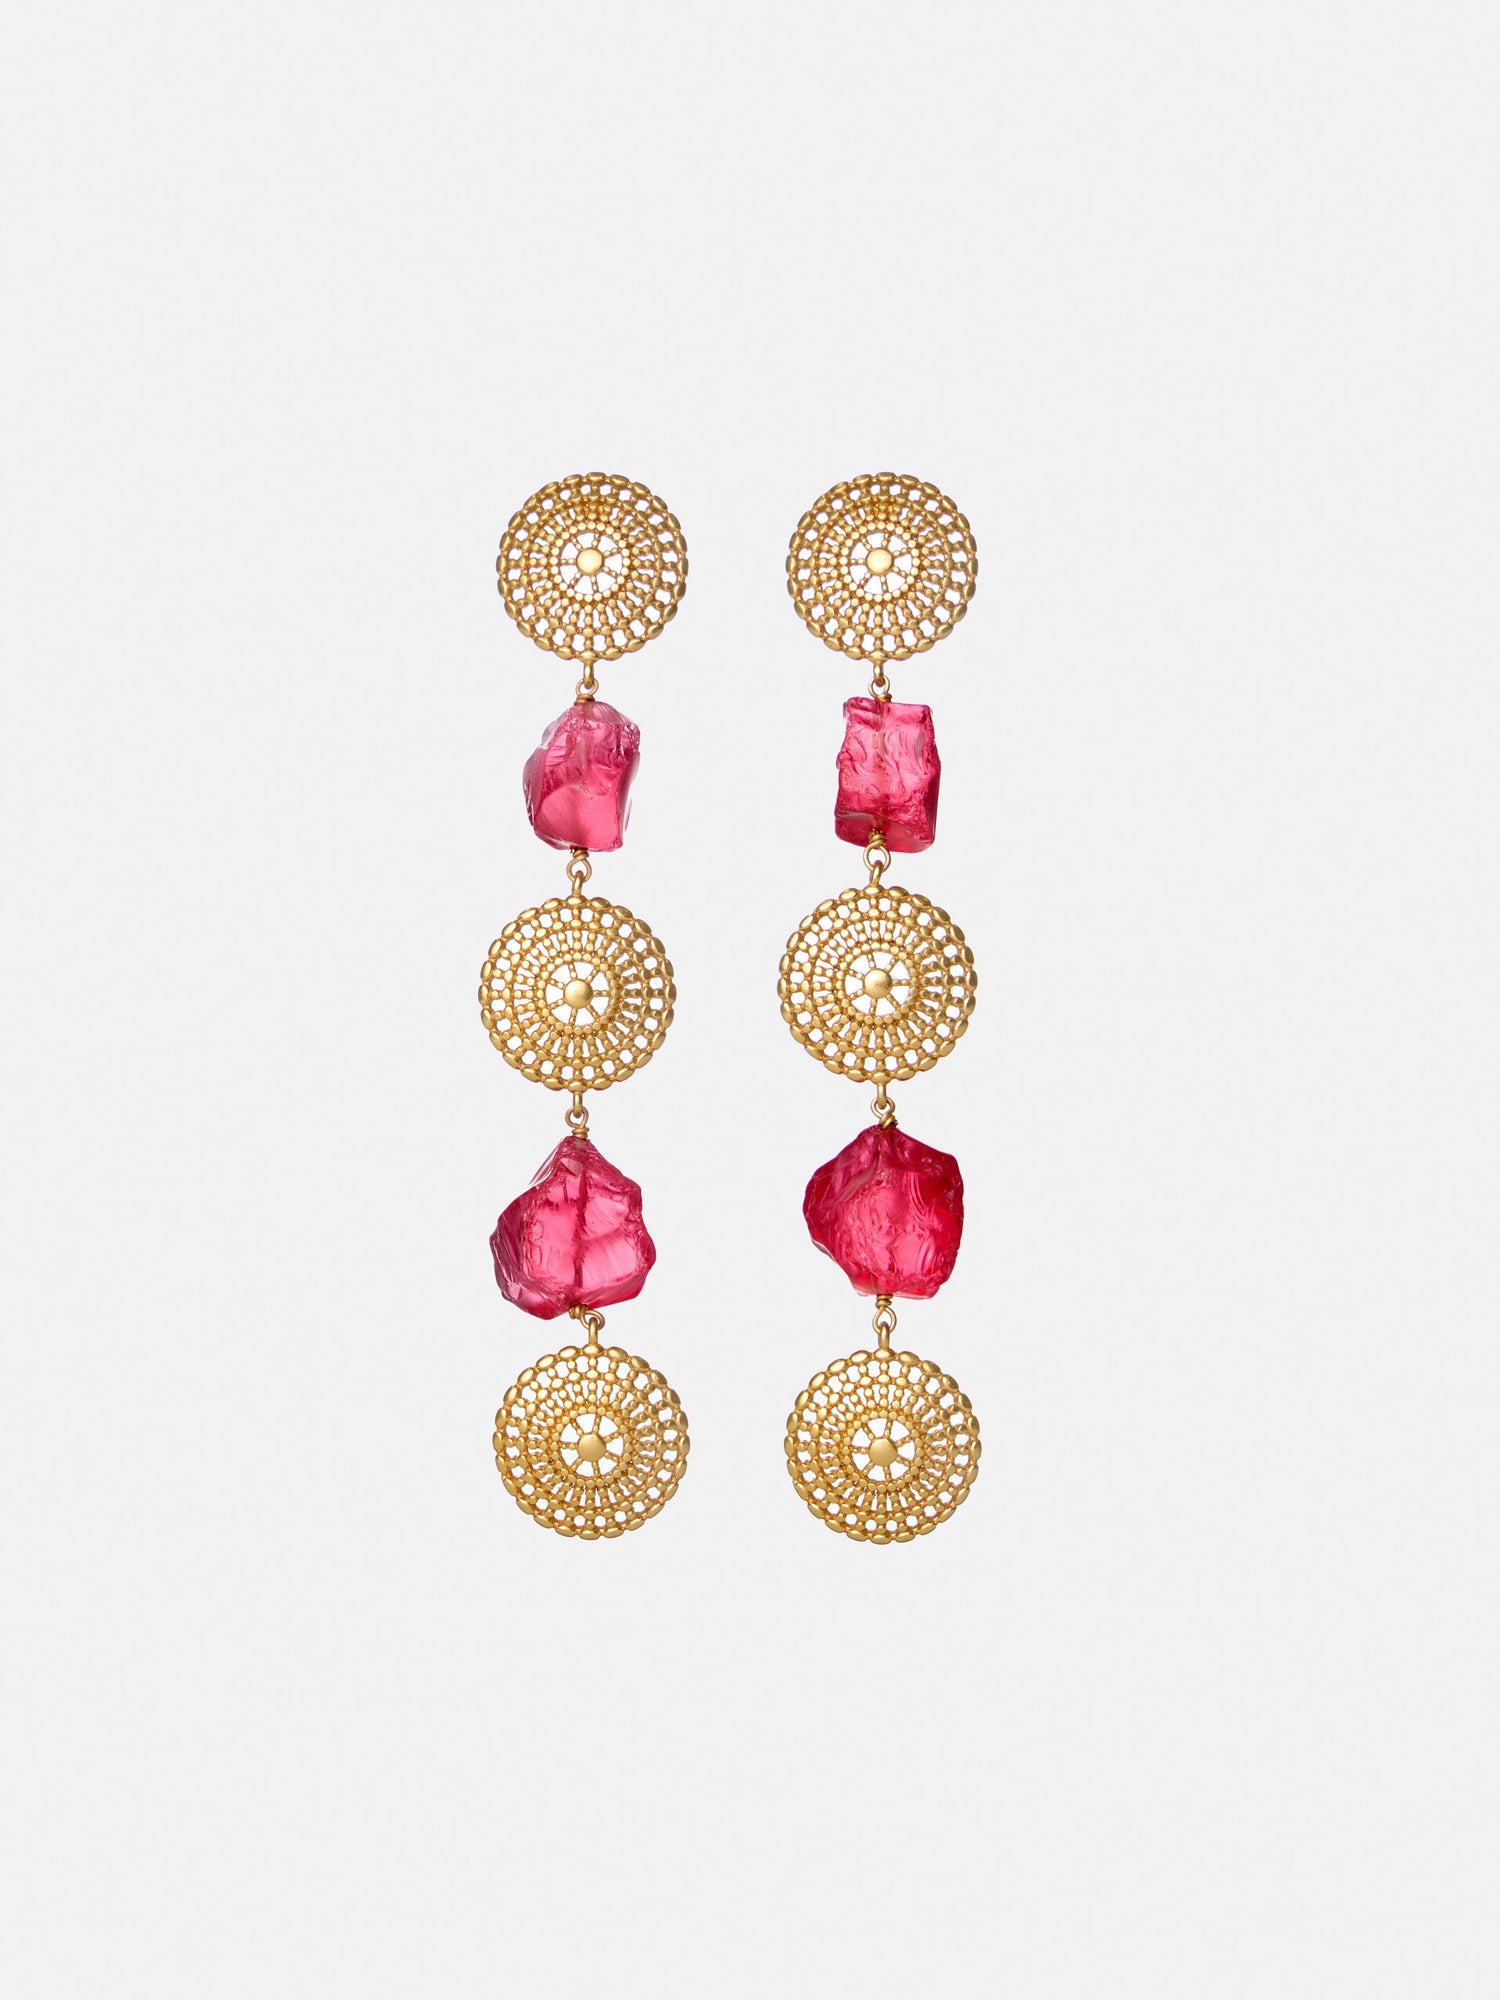 Long earring with pink stone details